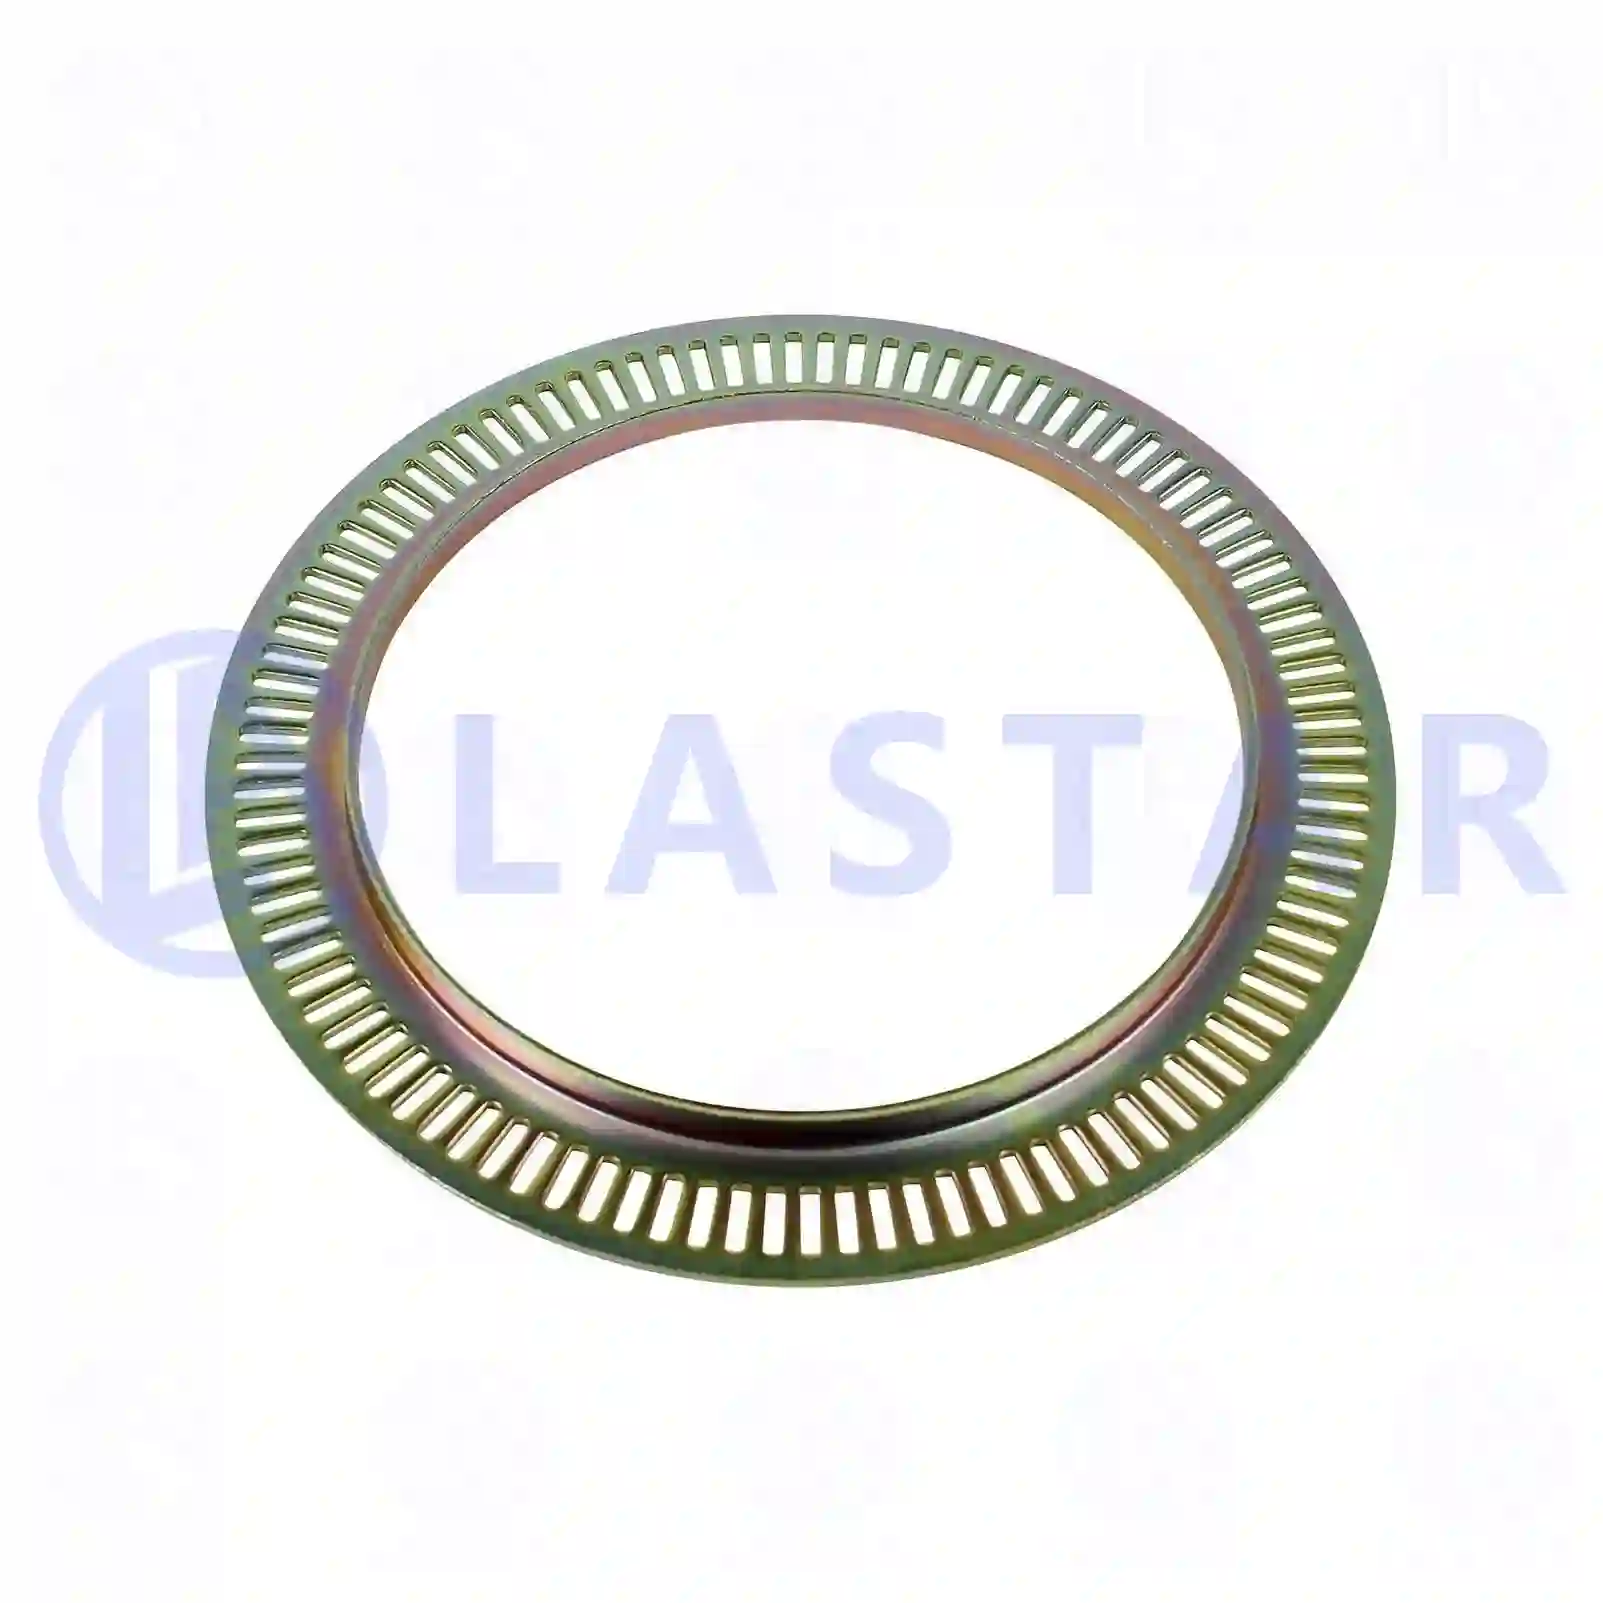 ABS ring, 77726880, 1442300, ZG50005-0008, ||  77726880 Lastar Spare Part | Truck Spare Parts, Auotomotive Spare Parts ABS ring, 77726880, 1442300, ZG50005-0008, ||  77726880 Lastar Spare Part | Truck Spare Parts, Auotomotive Spare Parts